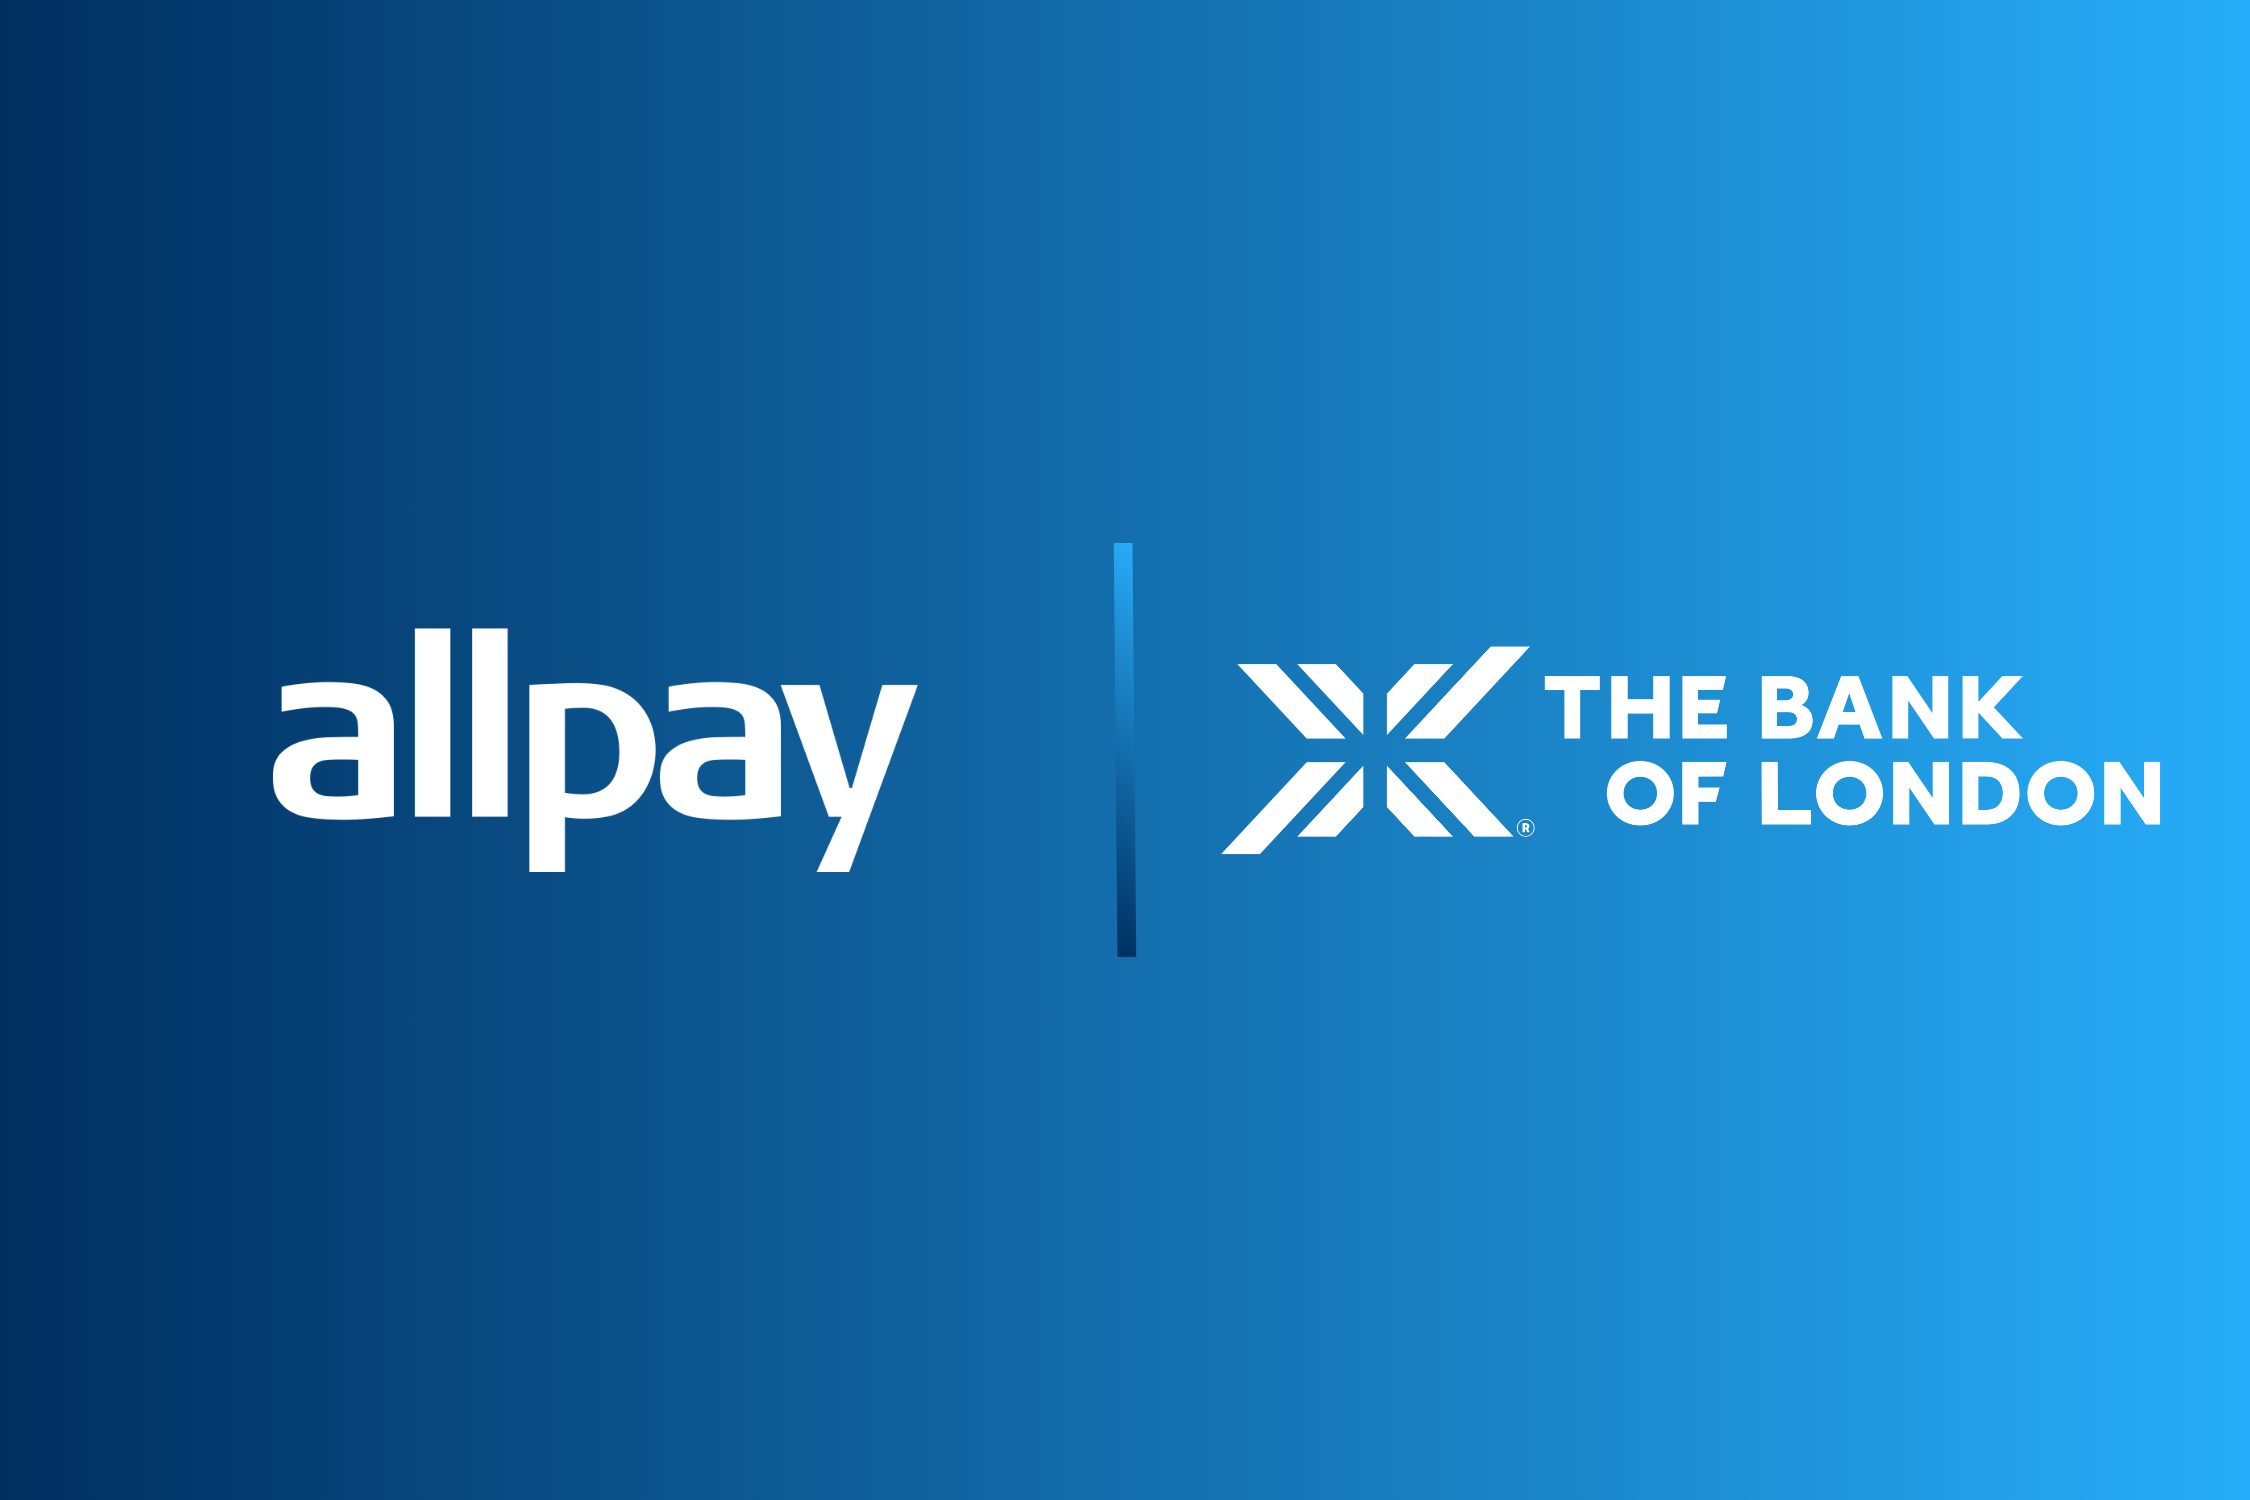 The Bank of London announces strategic partnership with allpay Limited to transform banking and payments in the UK Social Housing market